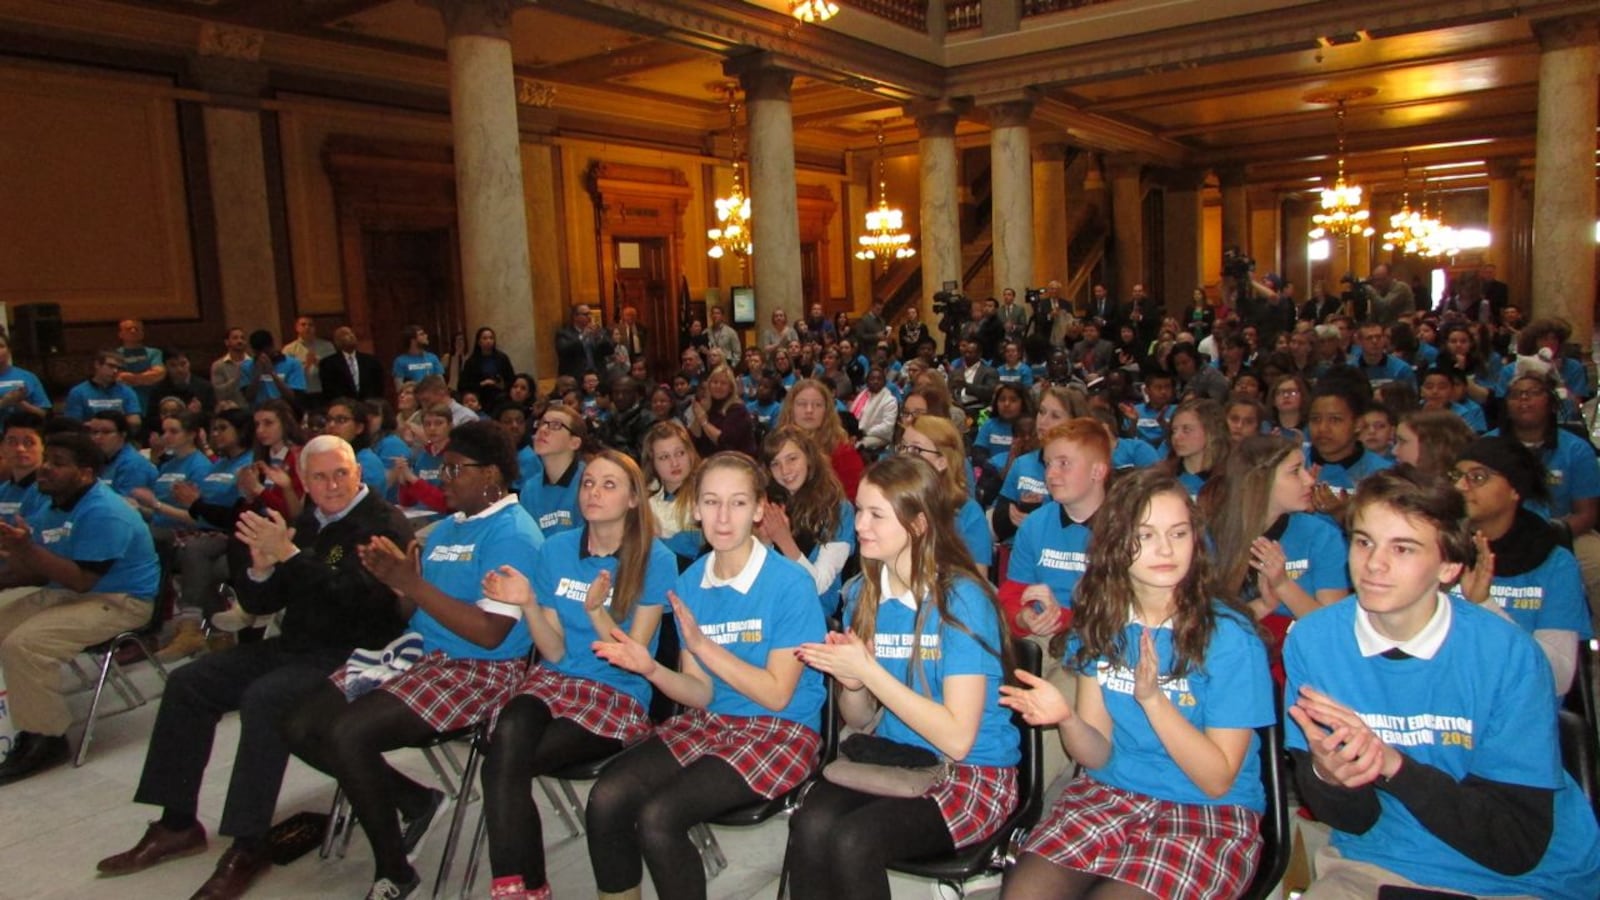 Students using vouchers and from charter schools attended a rally for school choice at the Statehouse in 2015.